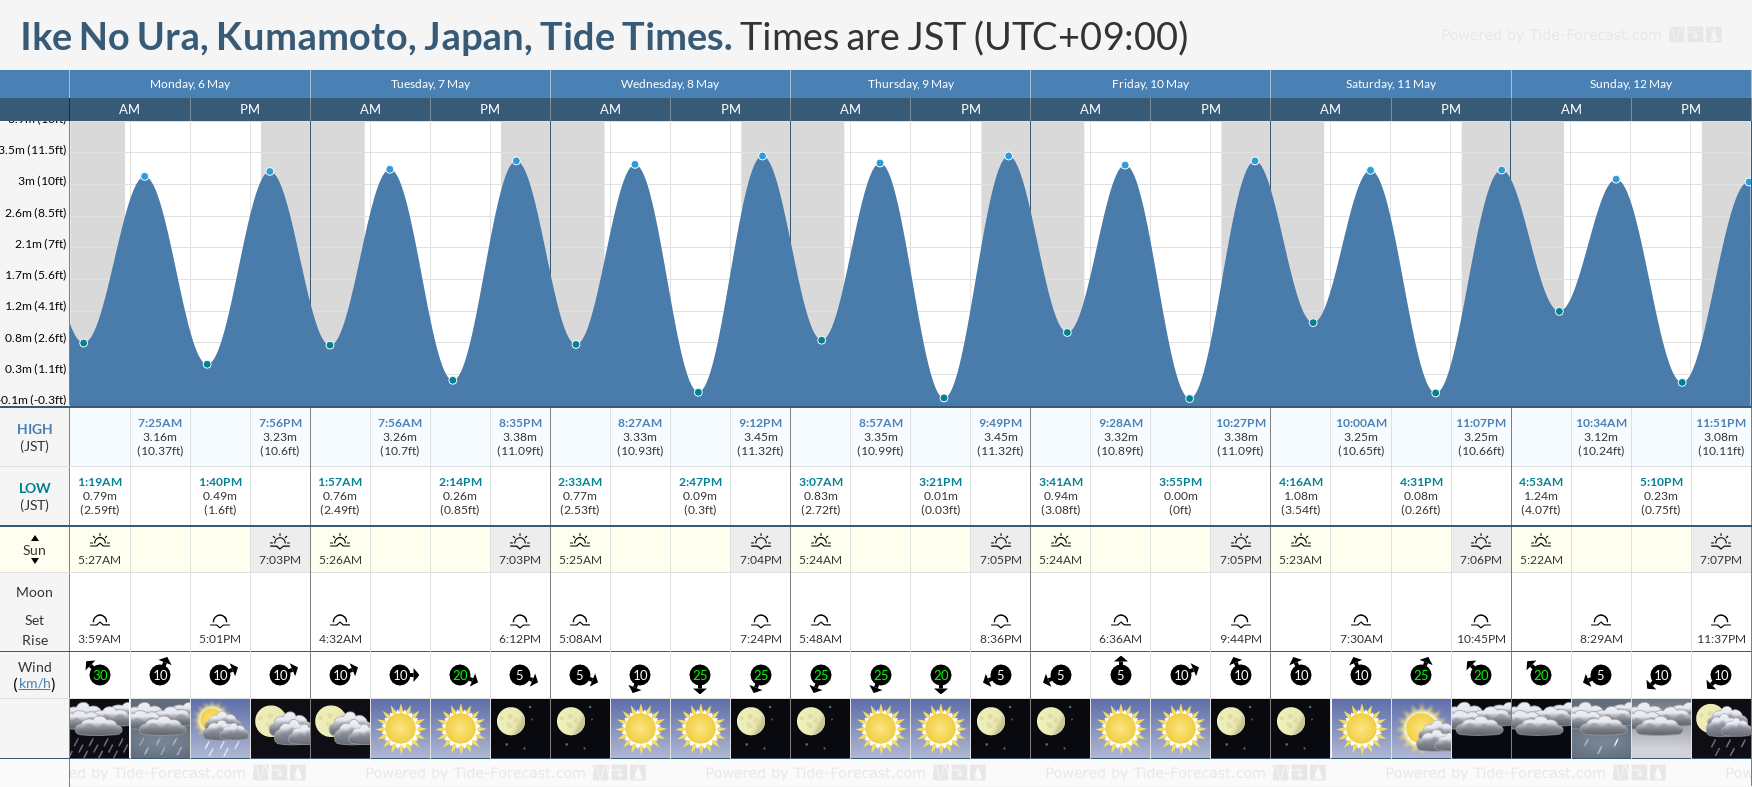 Ike No Ura, Kumamoto, Japan Tide Chart including high and low tide times for the next 7 days